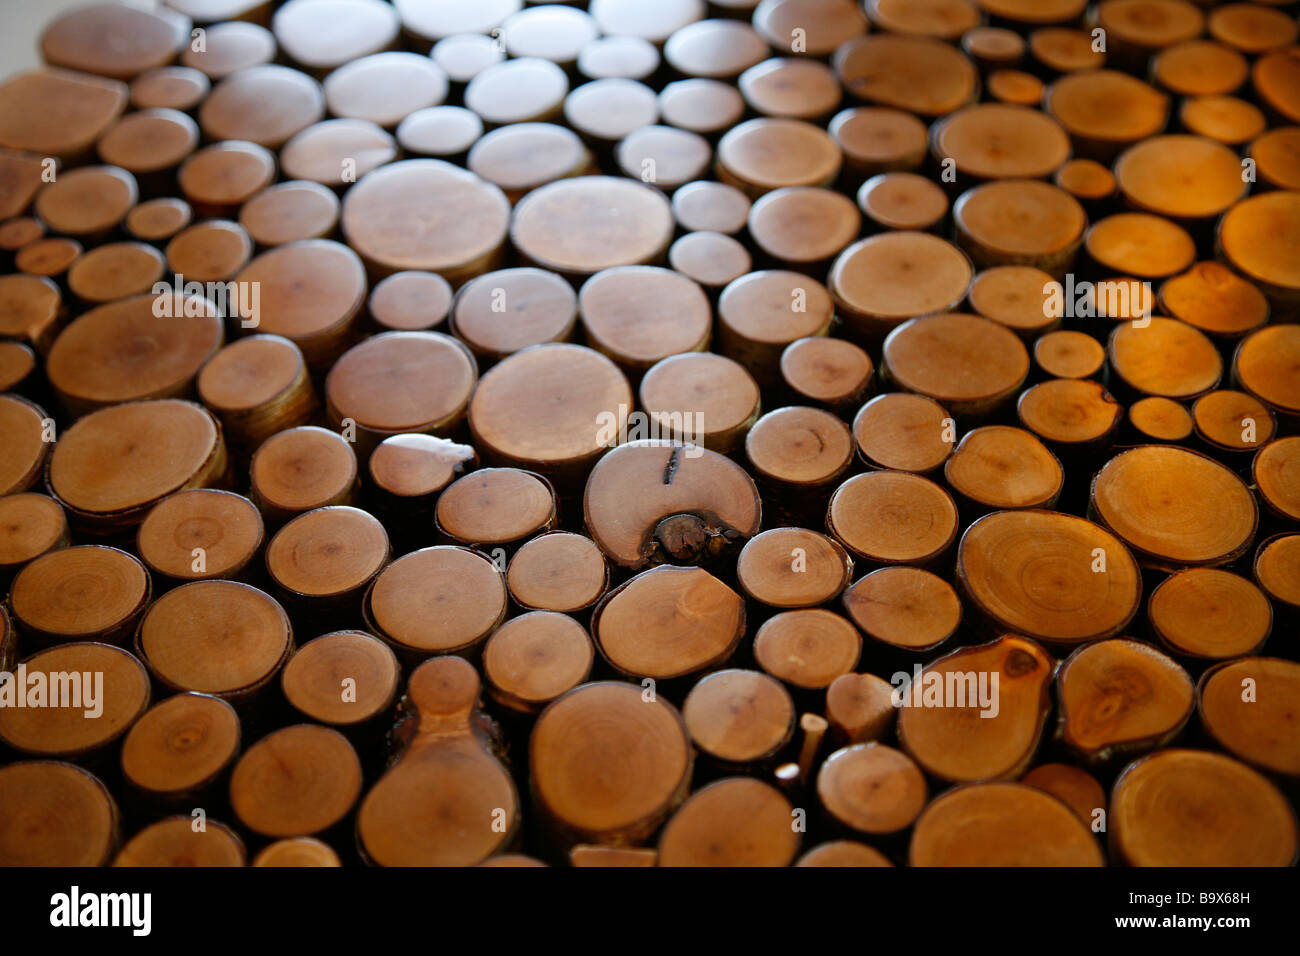 wooden cross section of branches Stock Photo